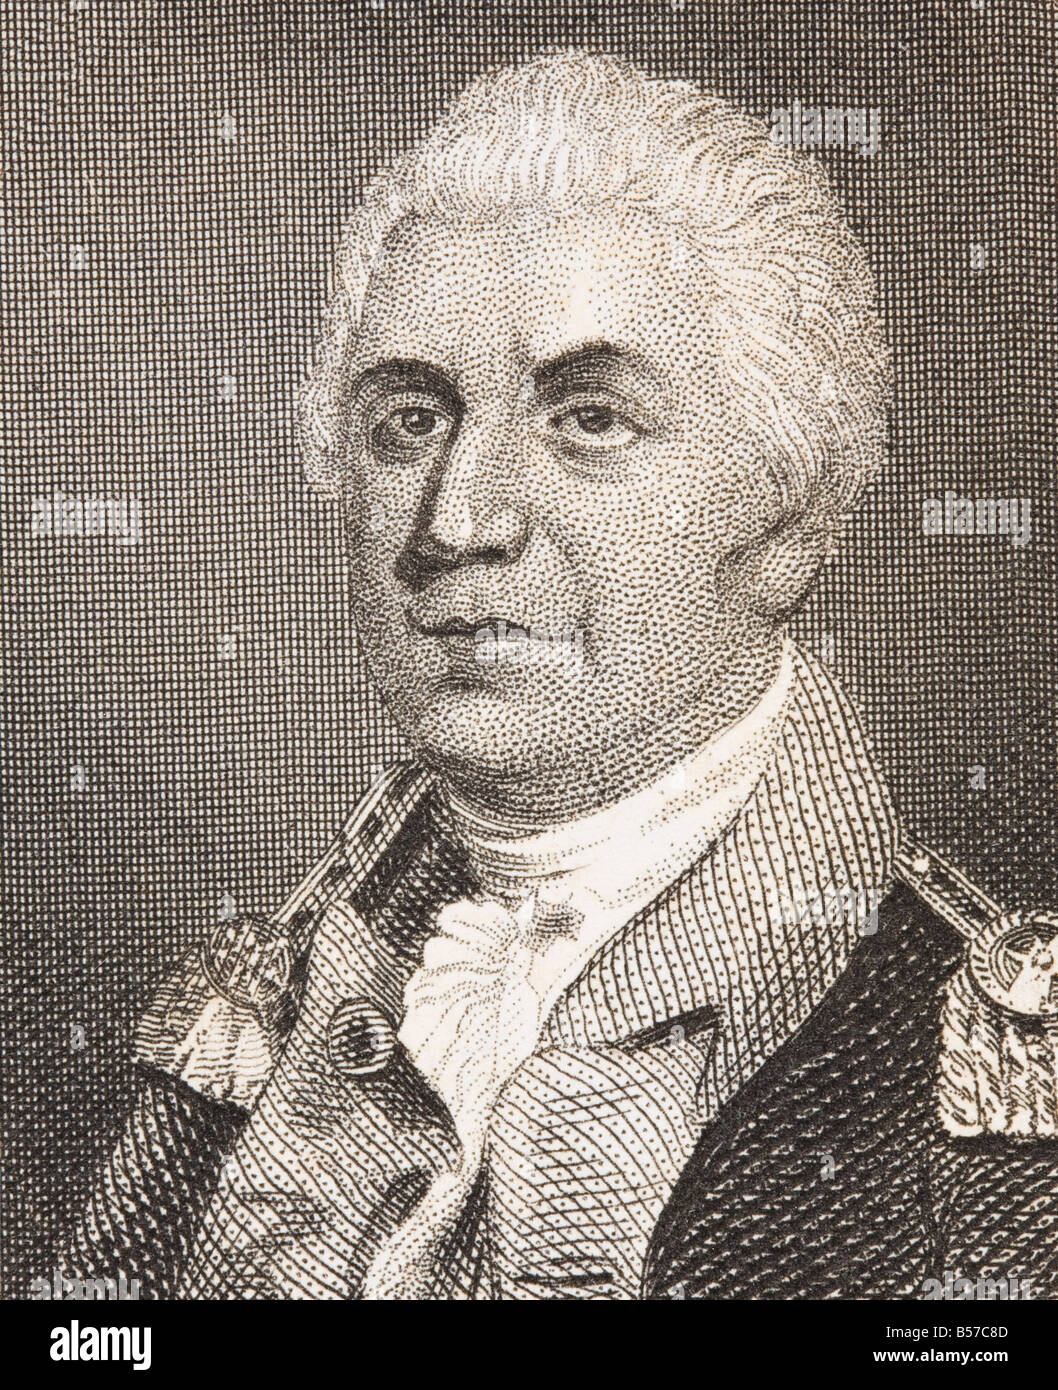 James Mitchell Varnum, 1748 - 1789. American lawyer and general during the American Revolutionary War. Stock Photo